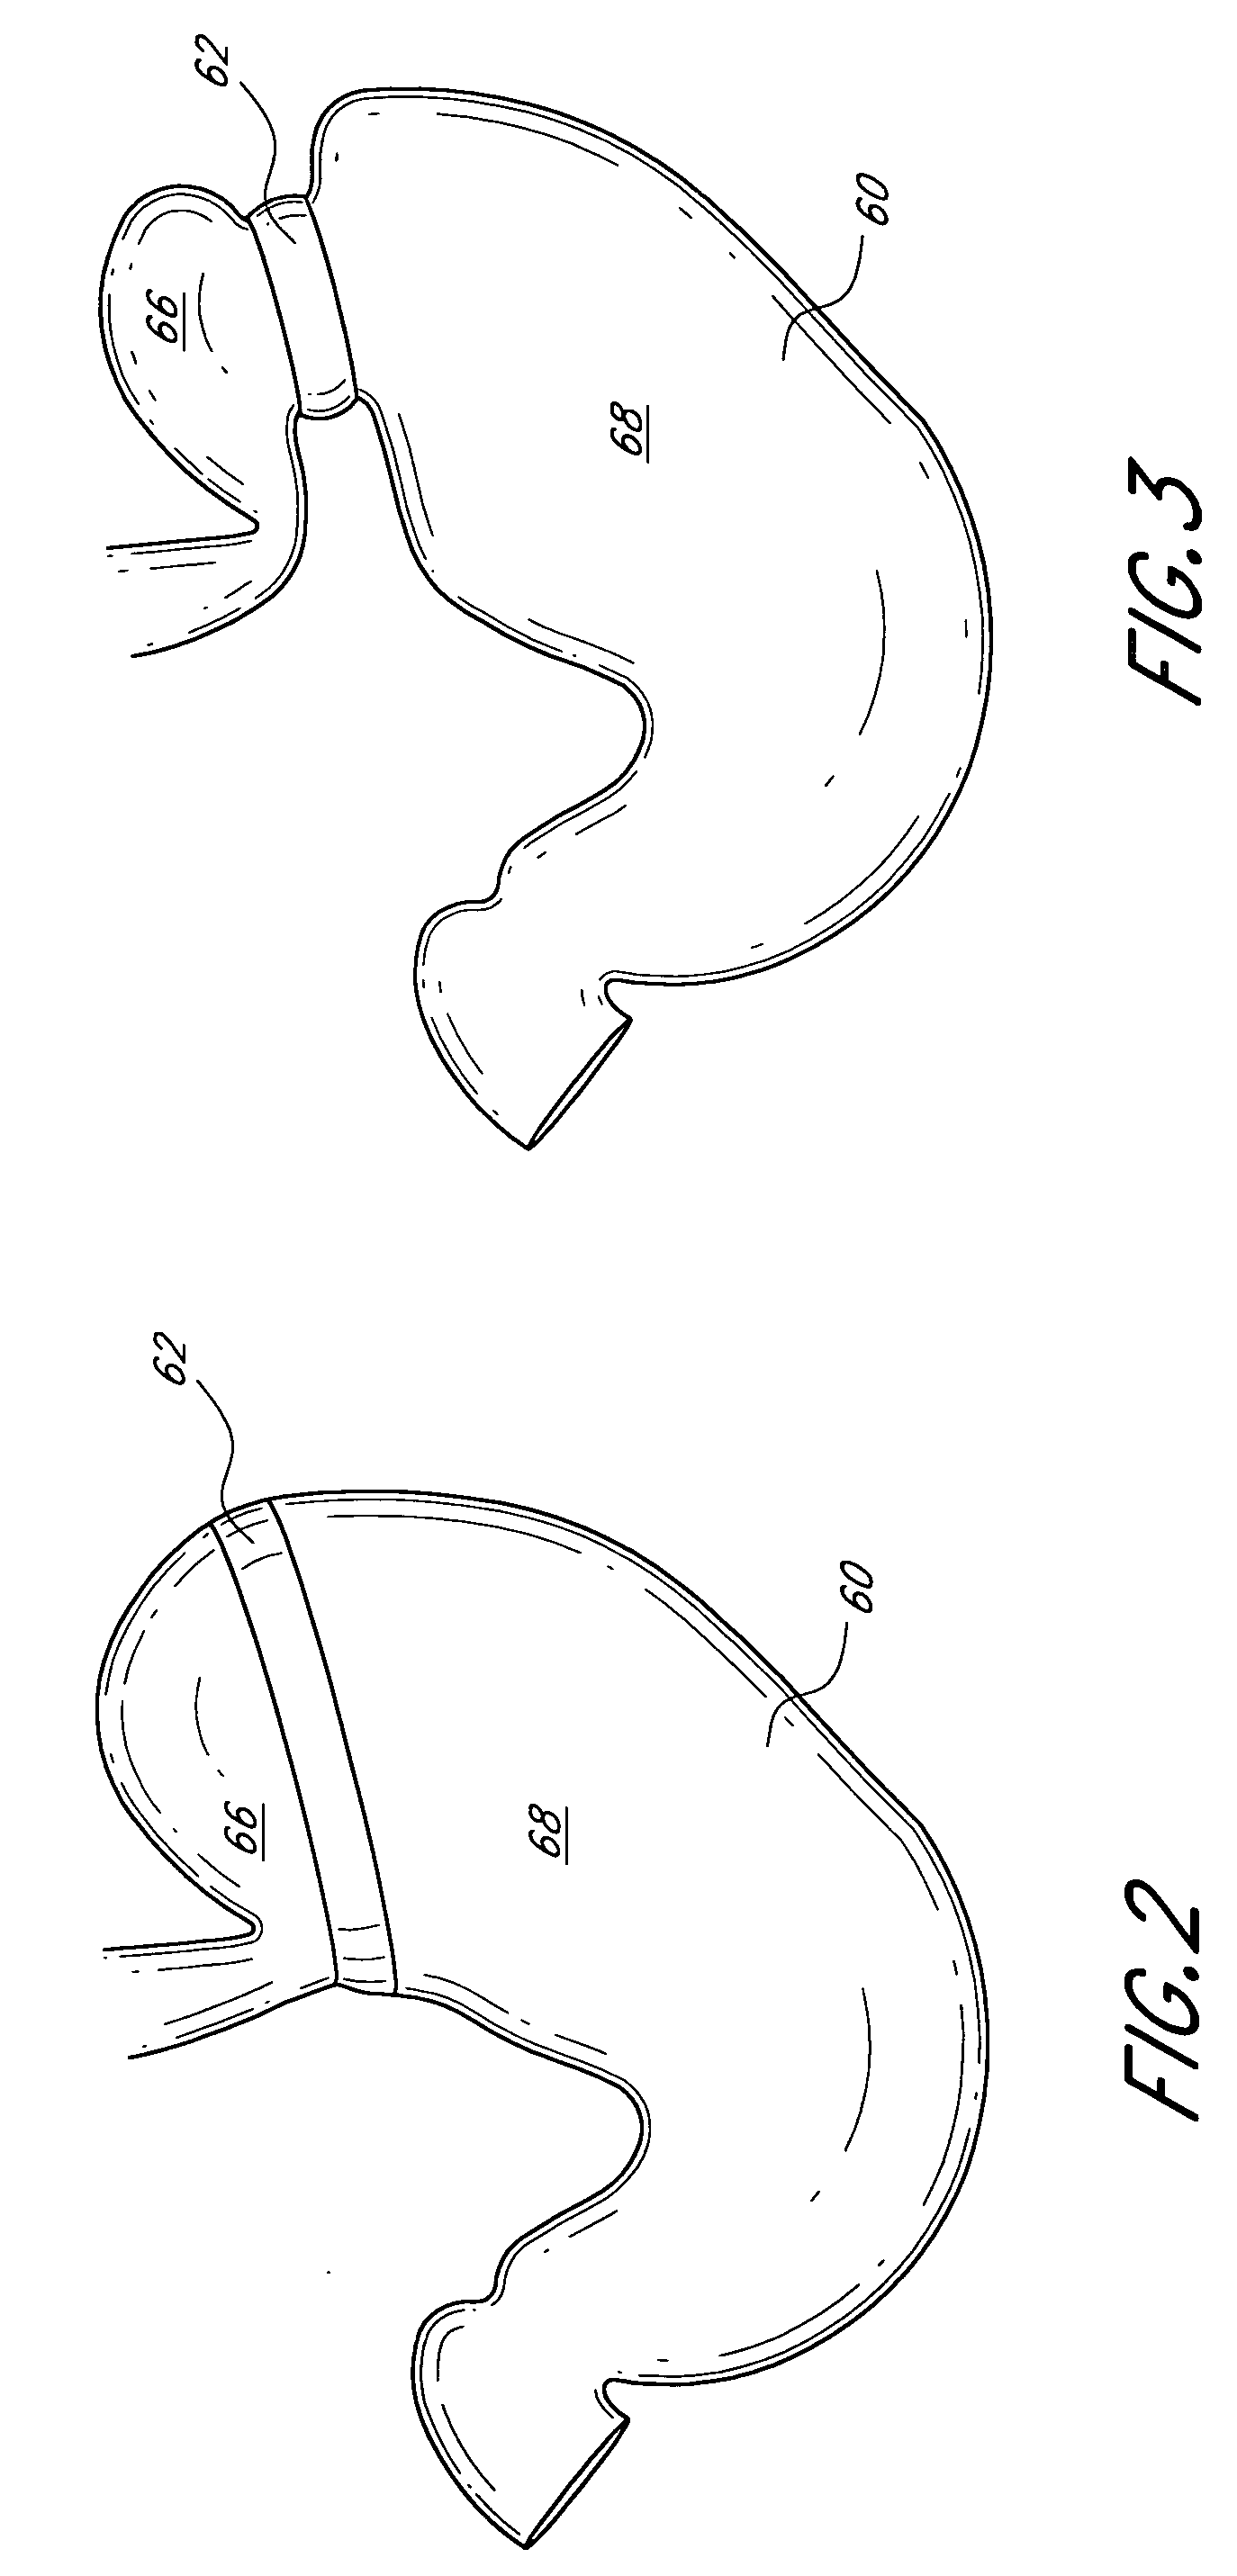 Dynamically adjustable gastric implants and methods of treating obesity using dynamically adjustable gastric implants